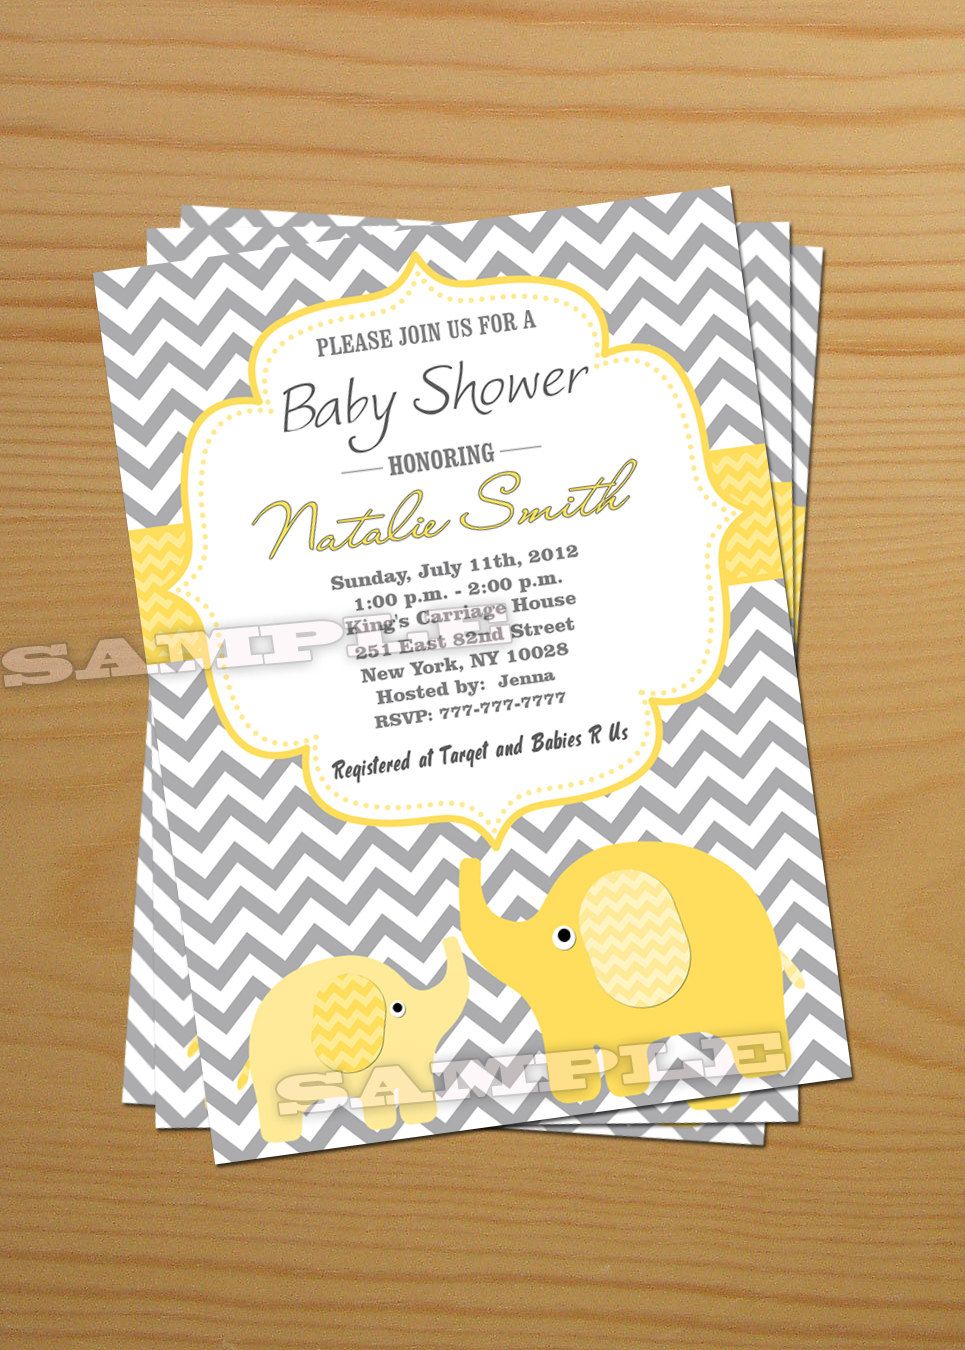 Full Size of Baby Shower:inspirational Elephant Baby Shower Invitations Photo Concepts Baby Shower Registry List With Baby Shower Nail Designs Plus Indian Baby Shower Together With Baby Shower Crafts As Well As Baby Shower Checklist